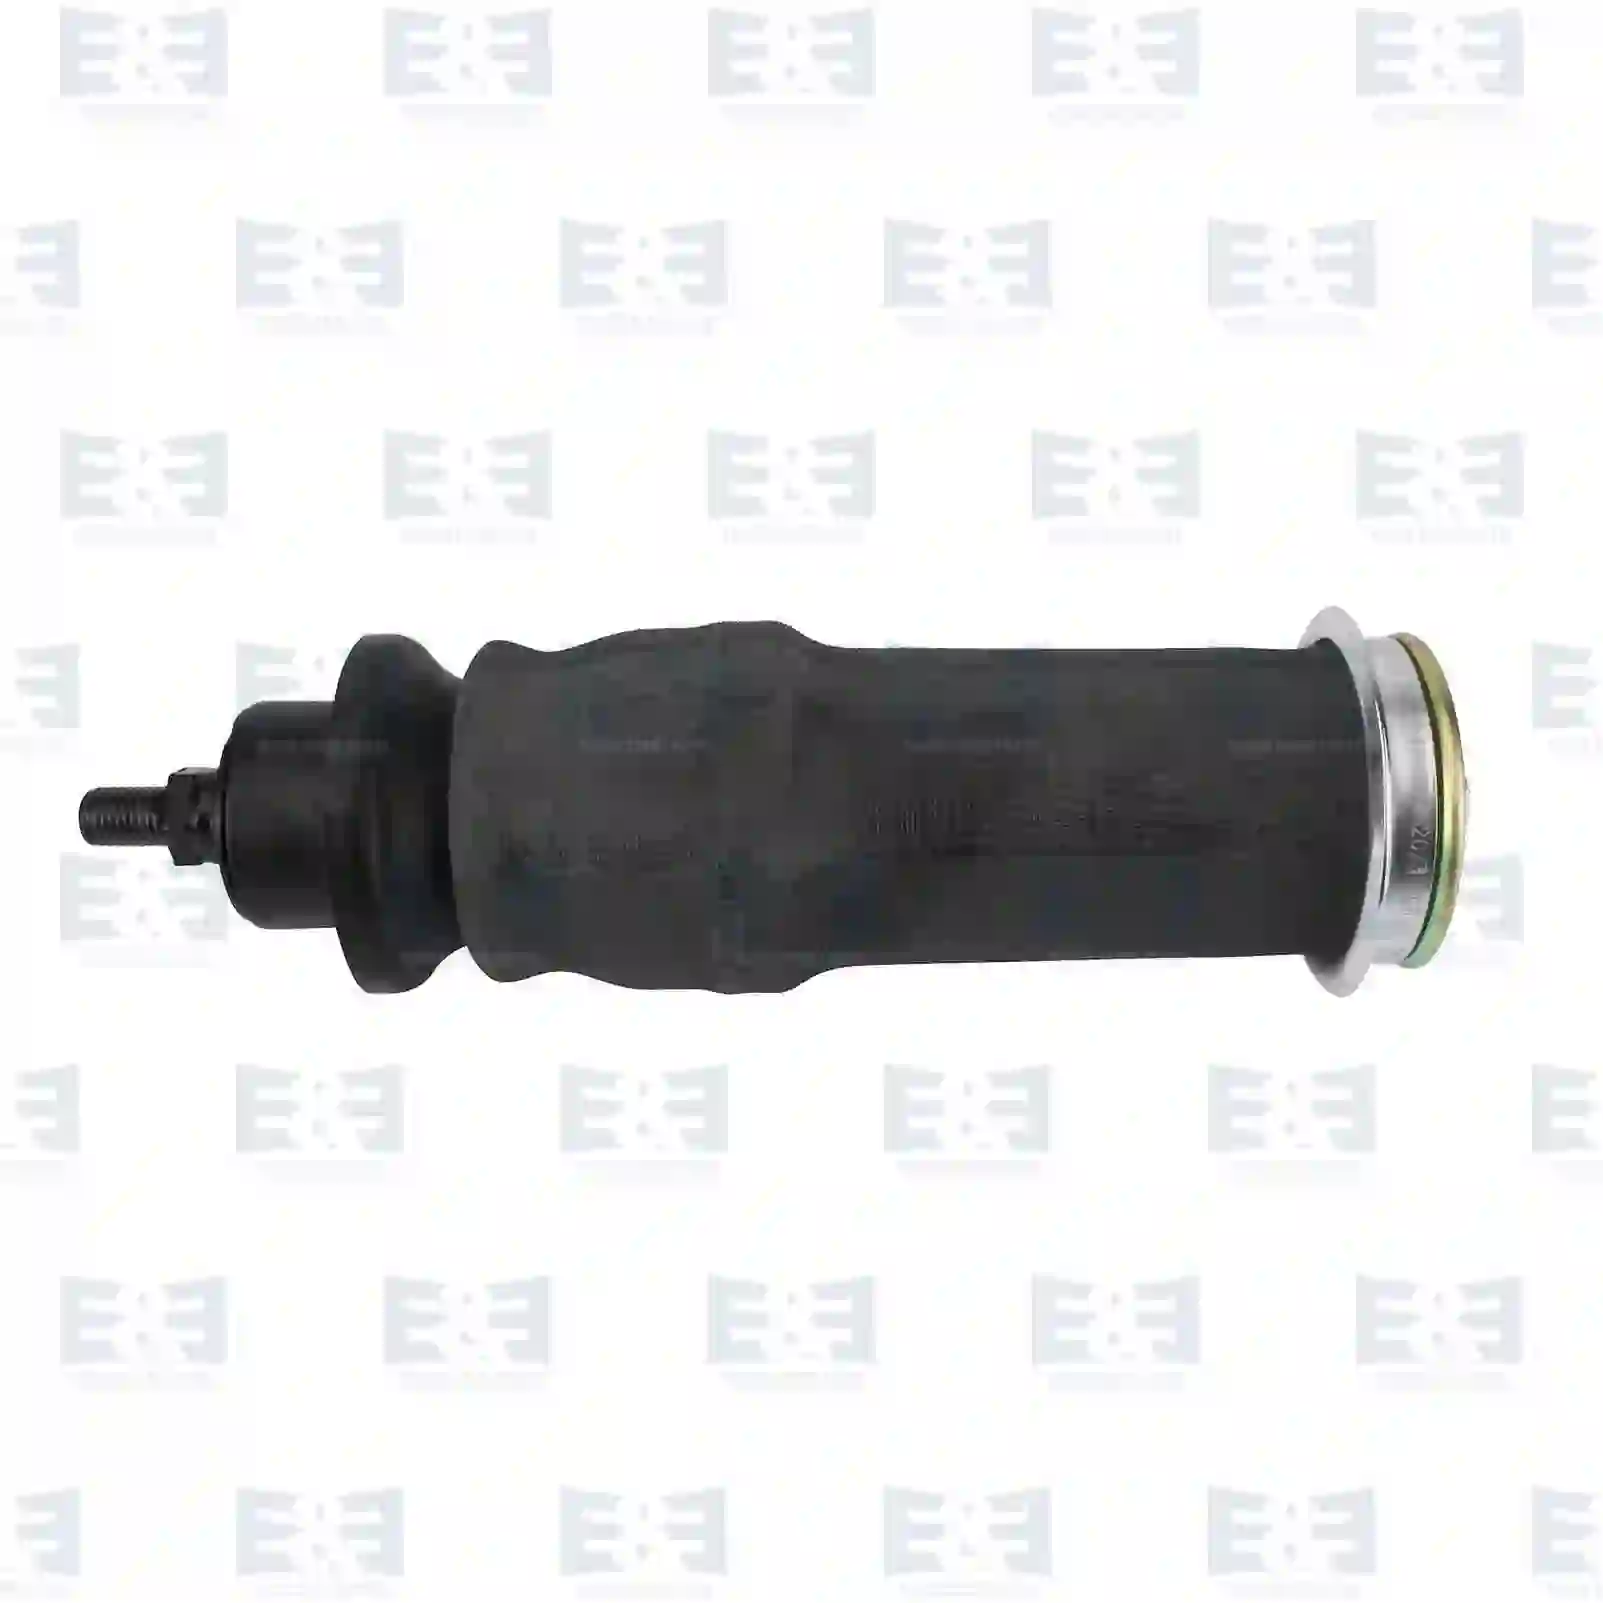 Cabin shock absorber, with air bellow, 2E2270992, 1397398S, , , , , ||  2E2270992 E&E Truck Spare Parts | Truck Spare Parts, Auotomotive Spare Parts Cabin shock absorber, with air bellow, 2E2270992, 1397398S, , , , , ||  2E2270992 E&E Truck Spare Parts | Truck Spare Parts, Auotomotive Spare Parts